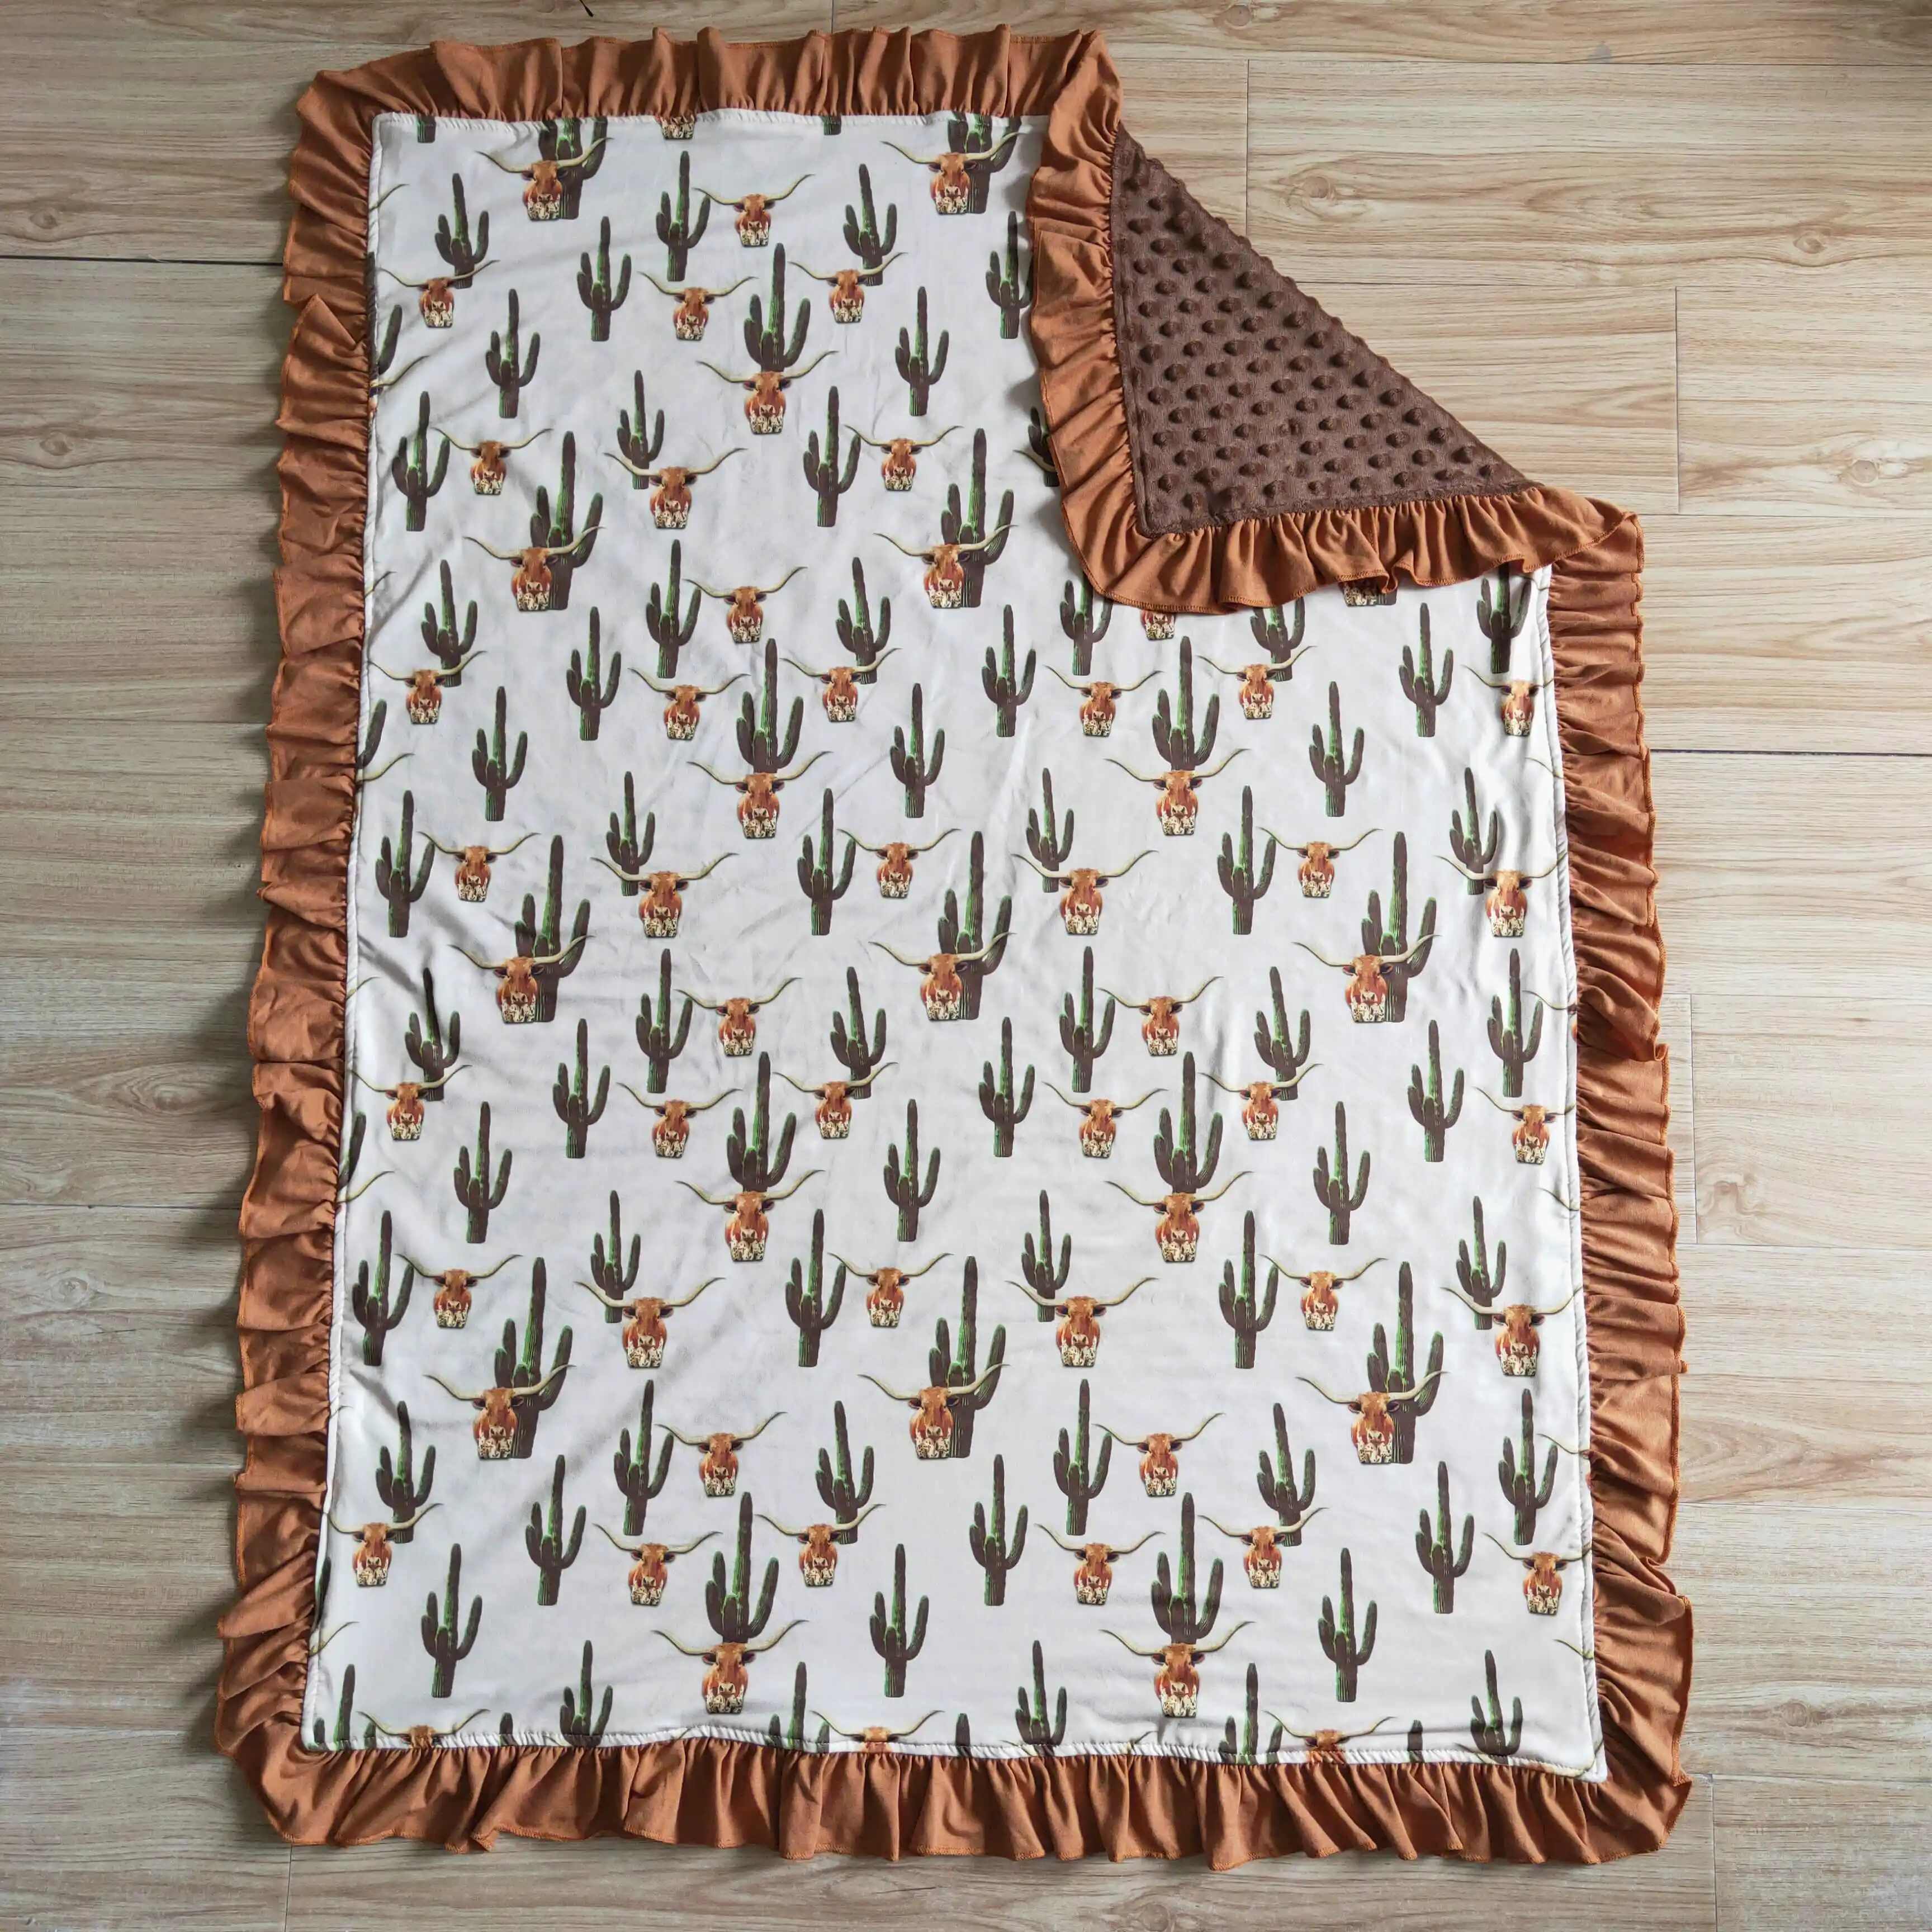 

Hot Selling RTS C​ow Cactus Print Infant Toddler Swaddle Wraps Soft Fleece Fabric Baby Blankets For Newborn